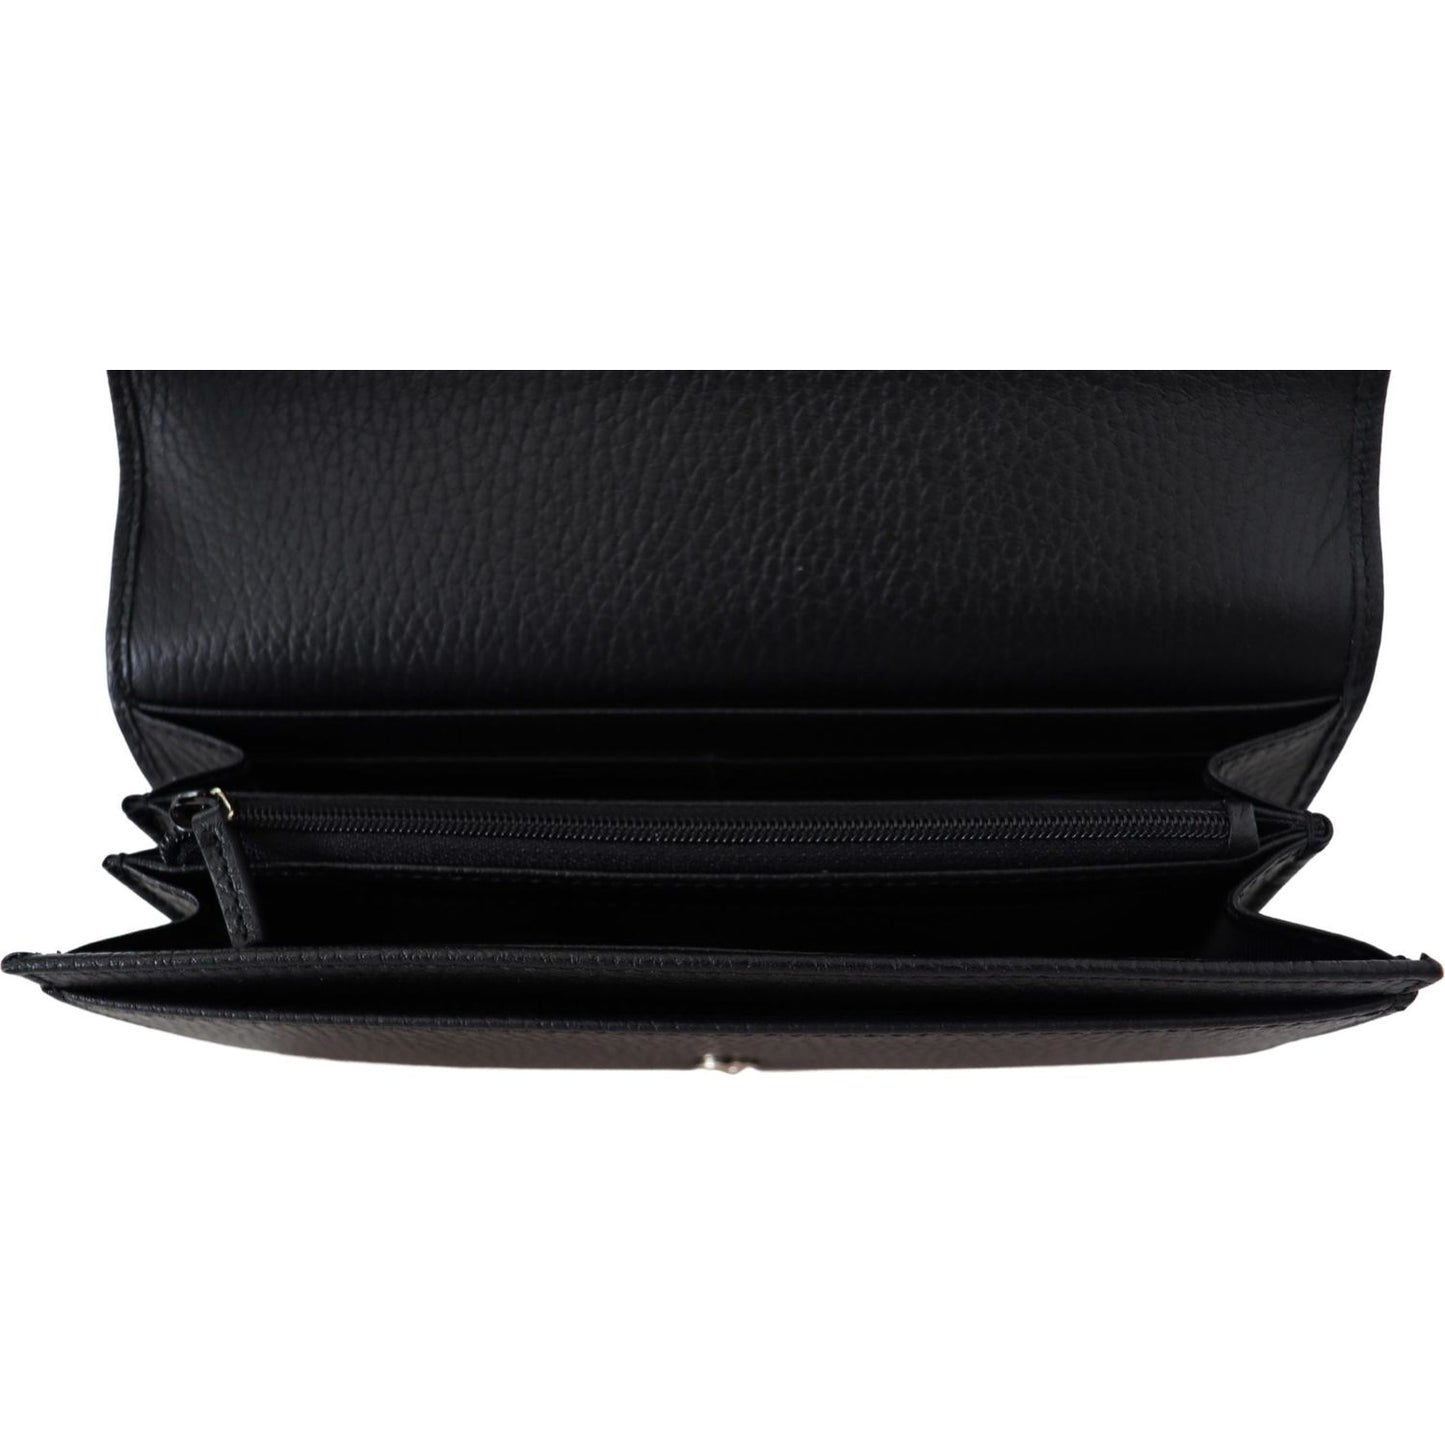 Gucci Elegant Black Leather Wallet with GG Snap Closure black-icon-leather-wallet IMG_6454-scaled-b53c360f-b86.jpg